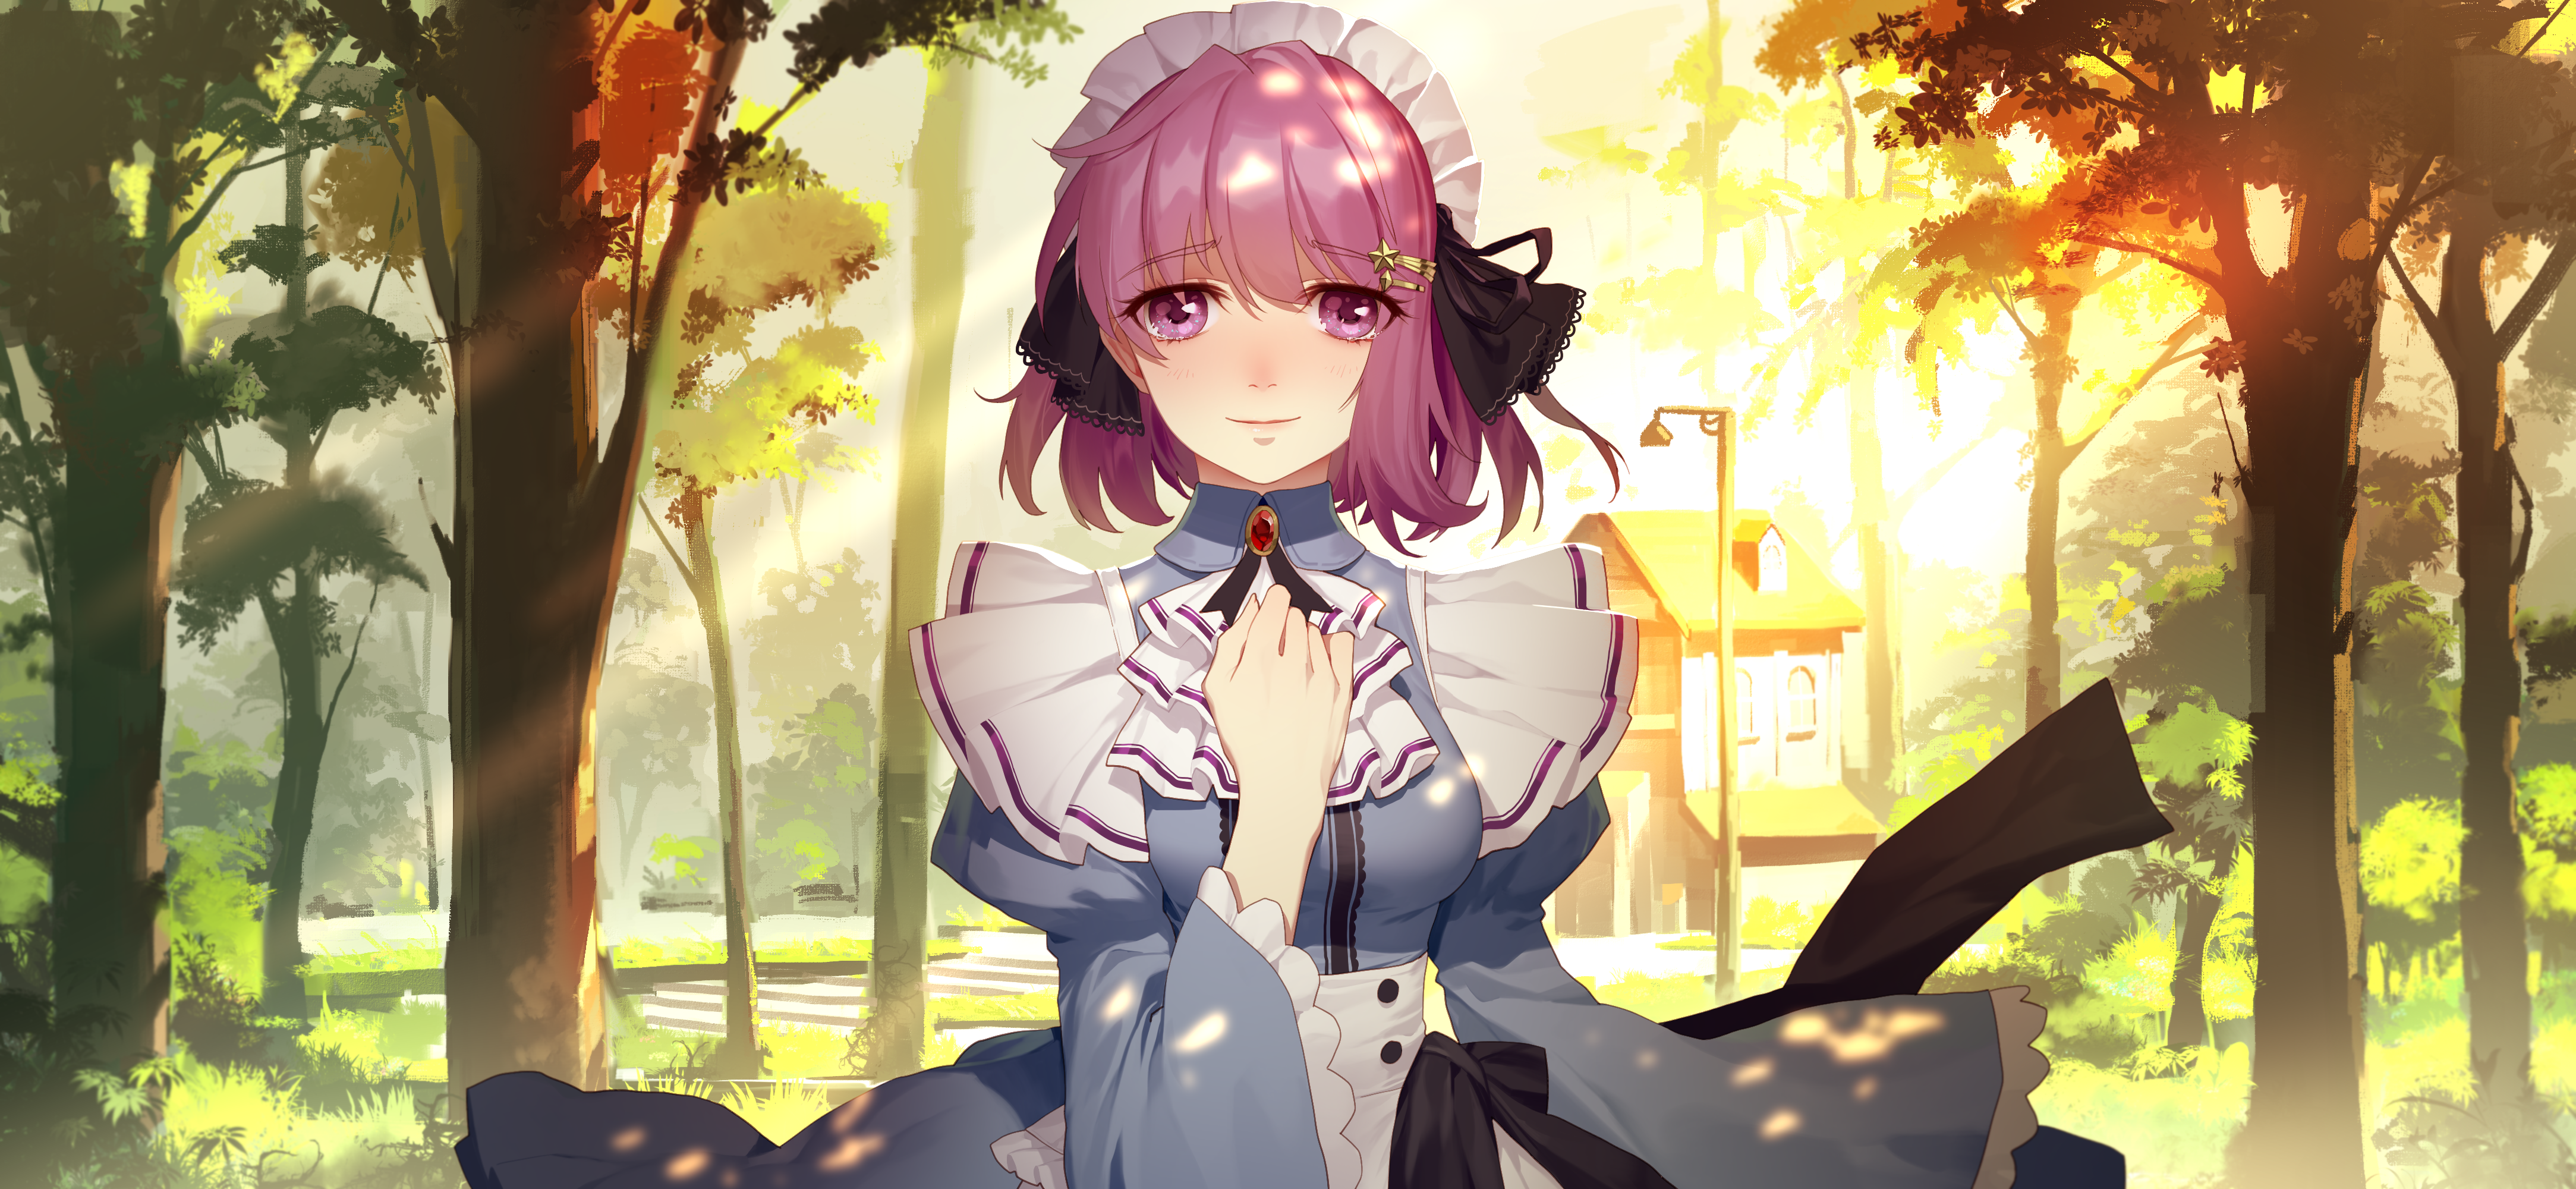 Anime Girls Original Characters Purple Hair Purple Eyes Tears Smiling Dress Maid Maid Outfit Outdoor 4334x2000